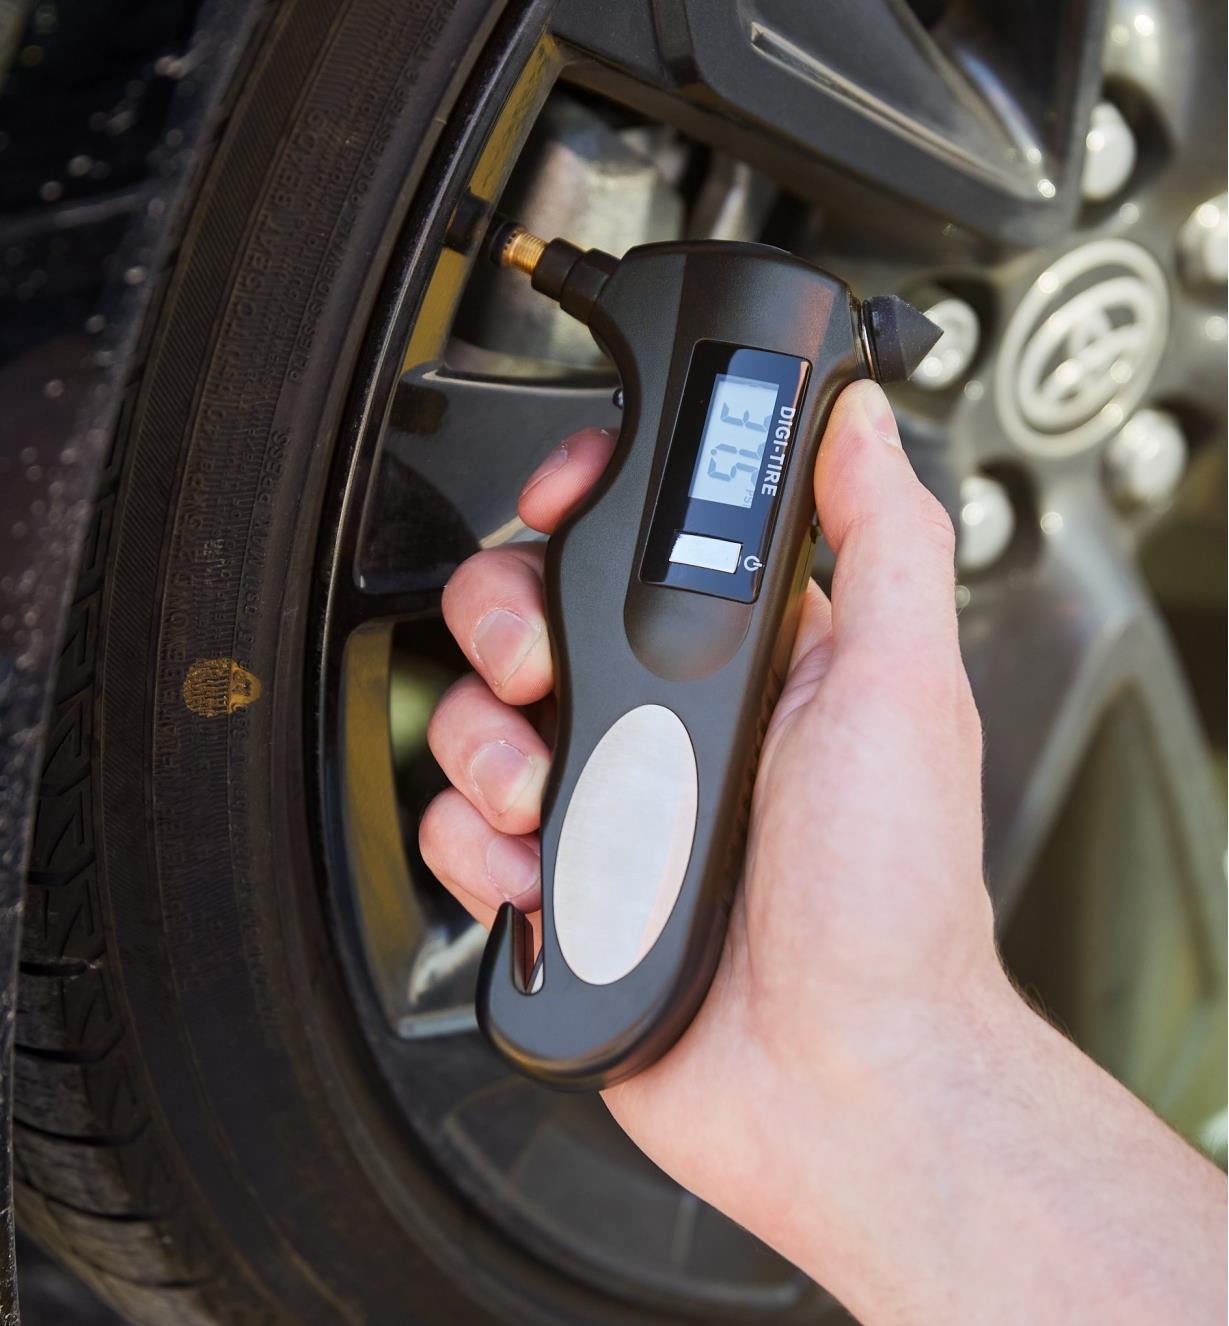 Checking car tire pressure using the 0 to 150 psi digital tire-pressure gauge